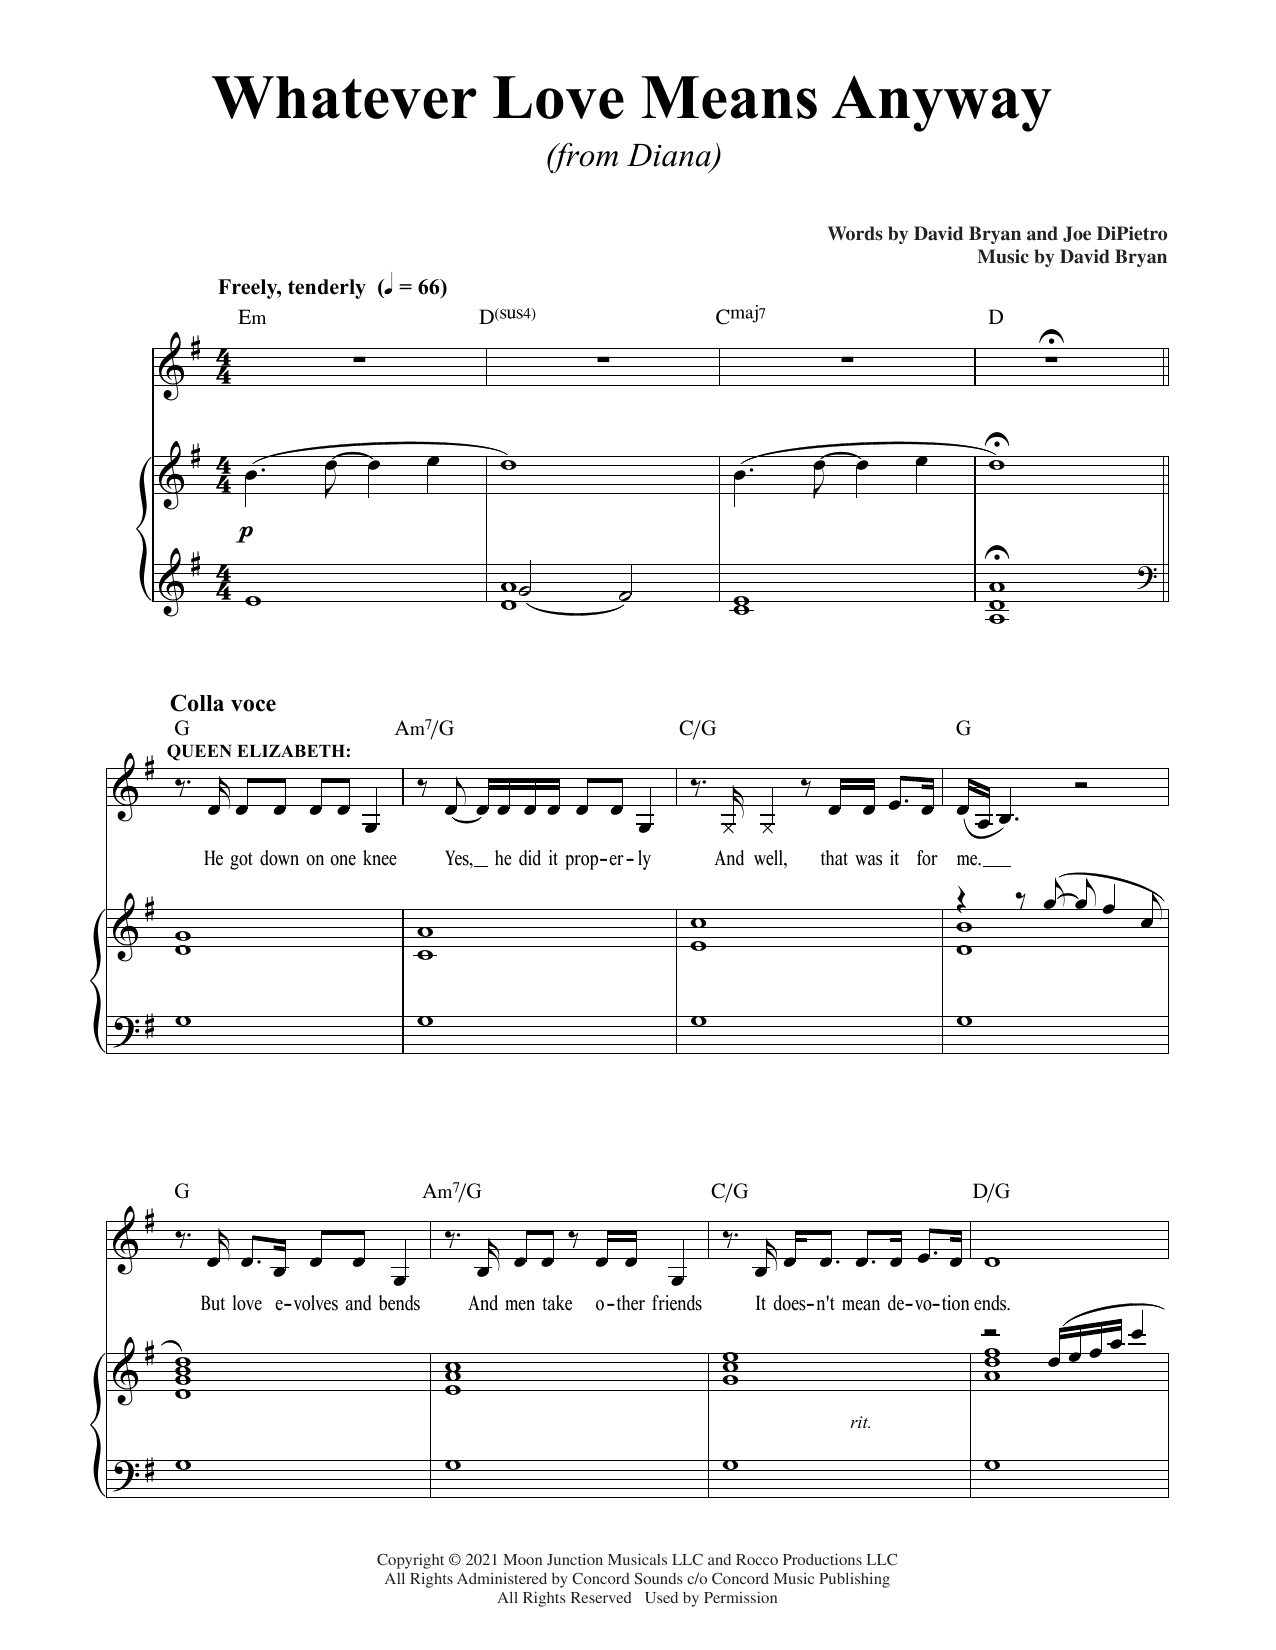 Download David Bryan & Joe DiPietro Whatever Love Means Anyway (from Diana) Sheet Music